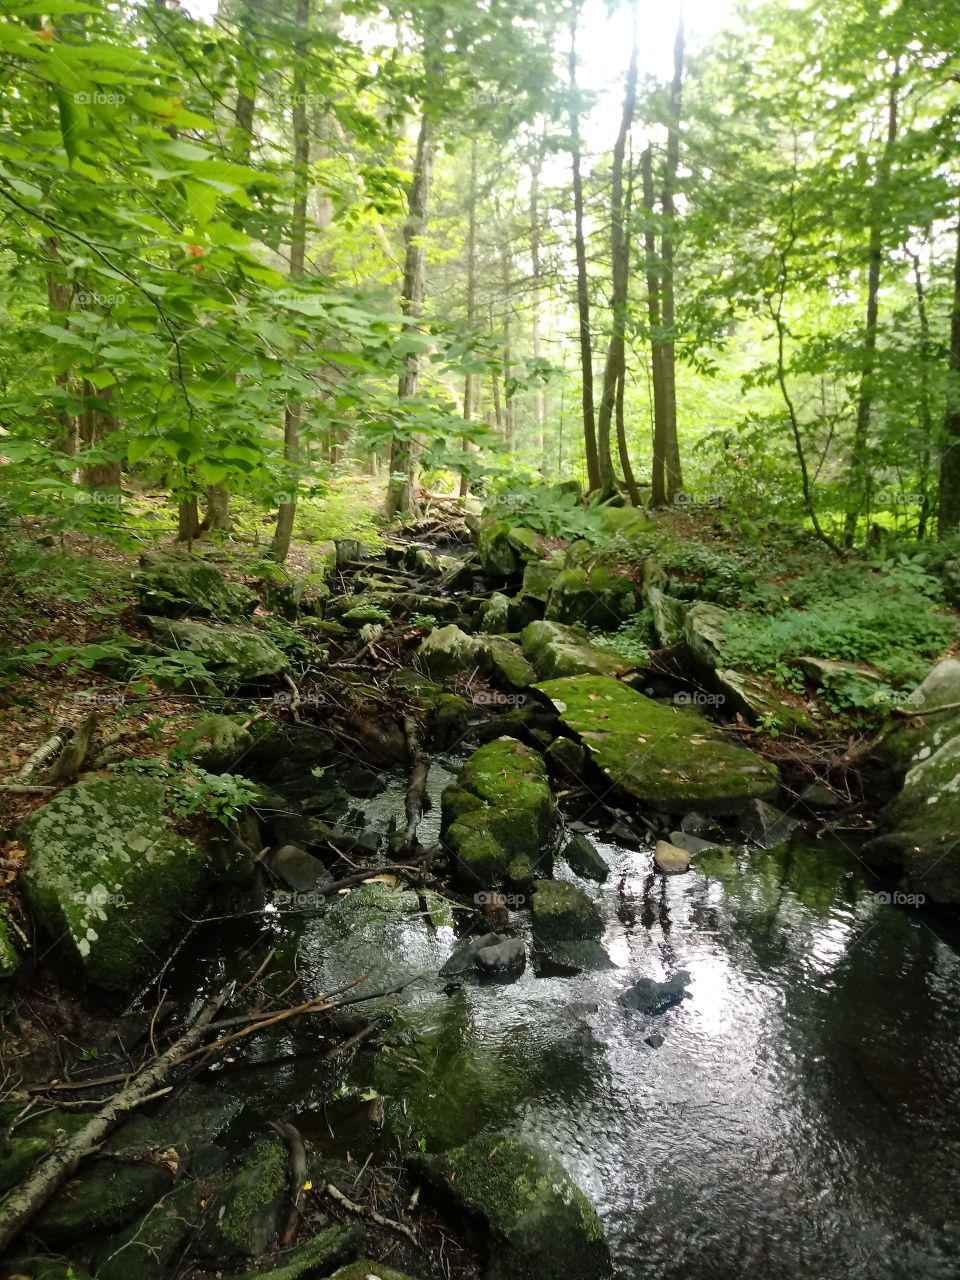 This s a photo of a creek I found while on a hiking trip. We had to go across the rocks.